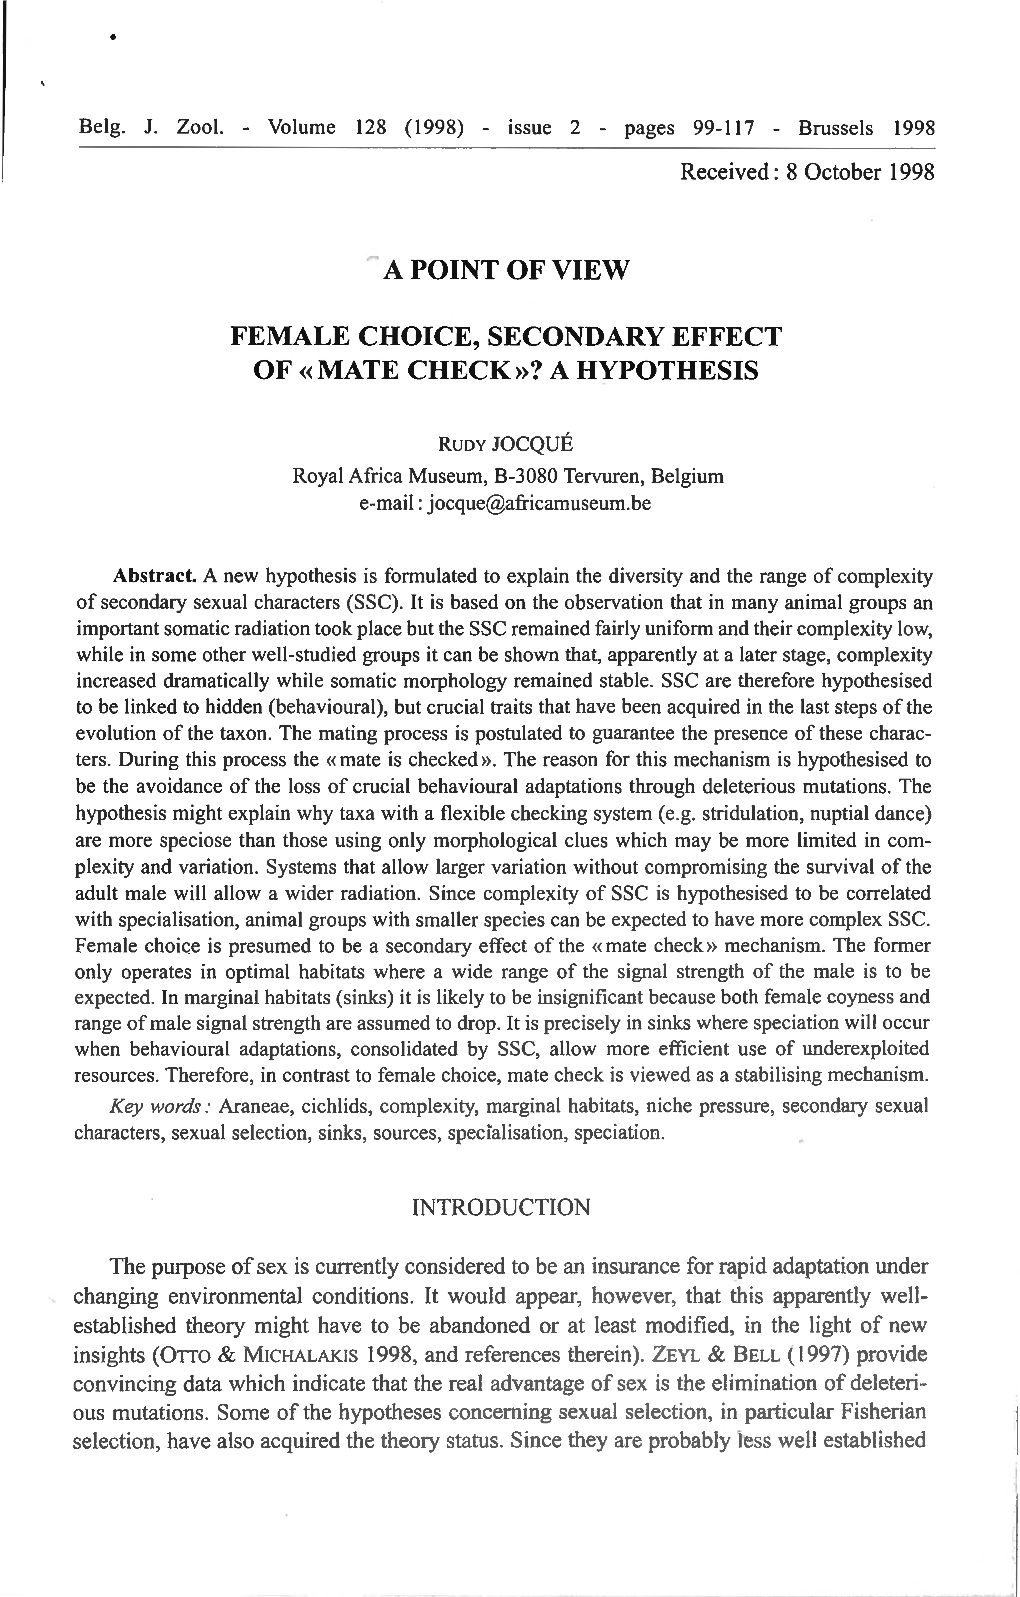 ""A Point of View Female Choice, Secondary Effect of «Mate